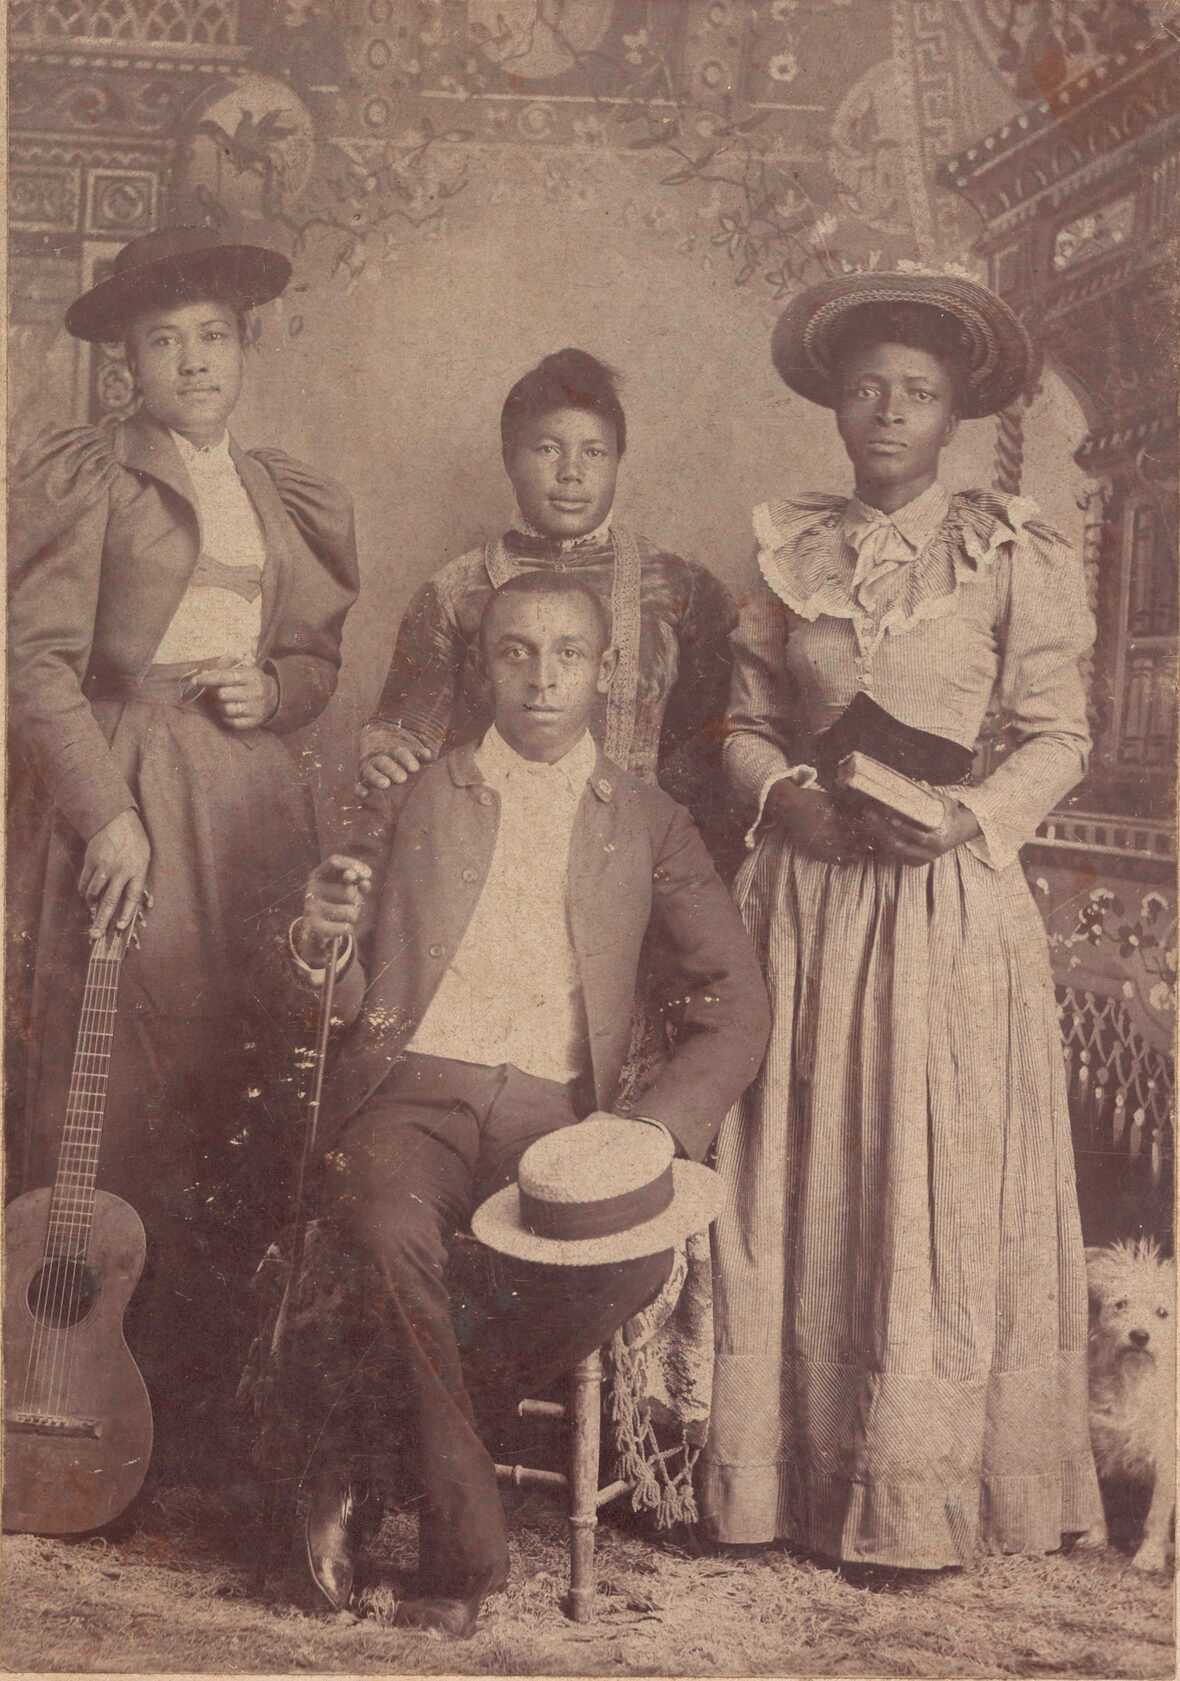 A cabinet card photograph depicting a sepia toned image of three women standing behind a seated man. The seated man is holding a cane with his right hand. His left hand is resting on his knee and holding onto a hat. The woman on the left side of the photograph is wearing a dark colored dress and jacket with a white shirt and dark colored hat. She is holding a guitar with her right hand. The woman in the middle has her right hand resting on the shoulder of the seated man. She is wearing a dark colored dress. The woman on the right side of the photograph is wearing a light colored, patterned dress and a light-colored hat. She is holding two books in her hand. Printed on the card beneath the photograph is “O. S. Goff” and “Fort Custer, Mont.” The back of the card is blank.